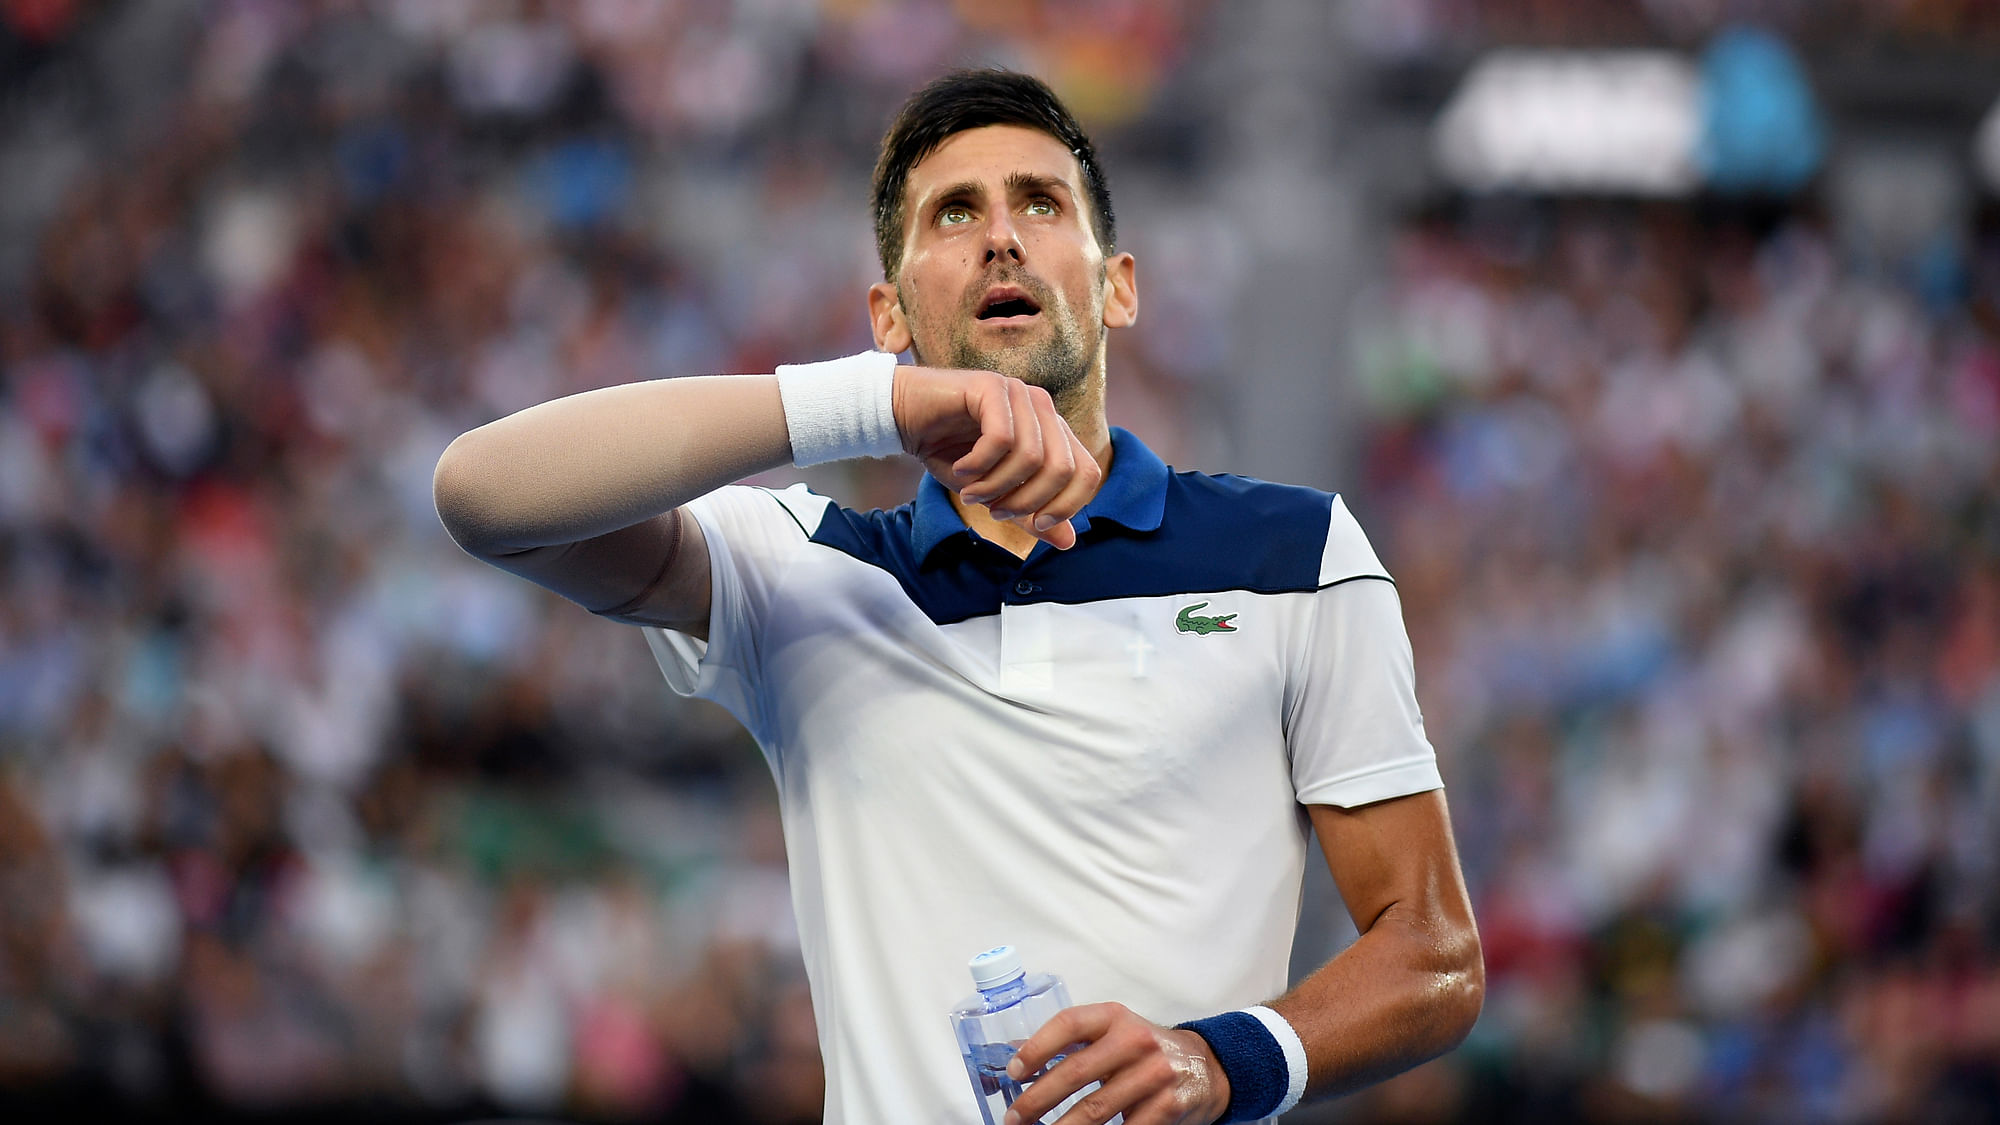 <div class="paragraphs"><p>Novak Djokovic's visa has been cancelled on 'health and good order grounds.'</p></div>